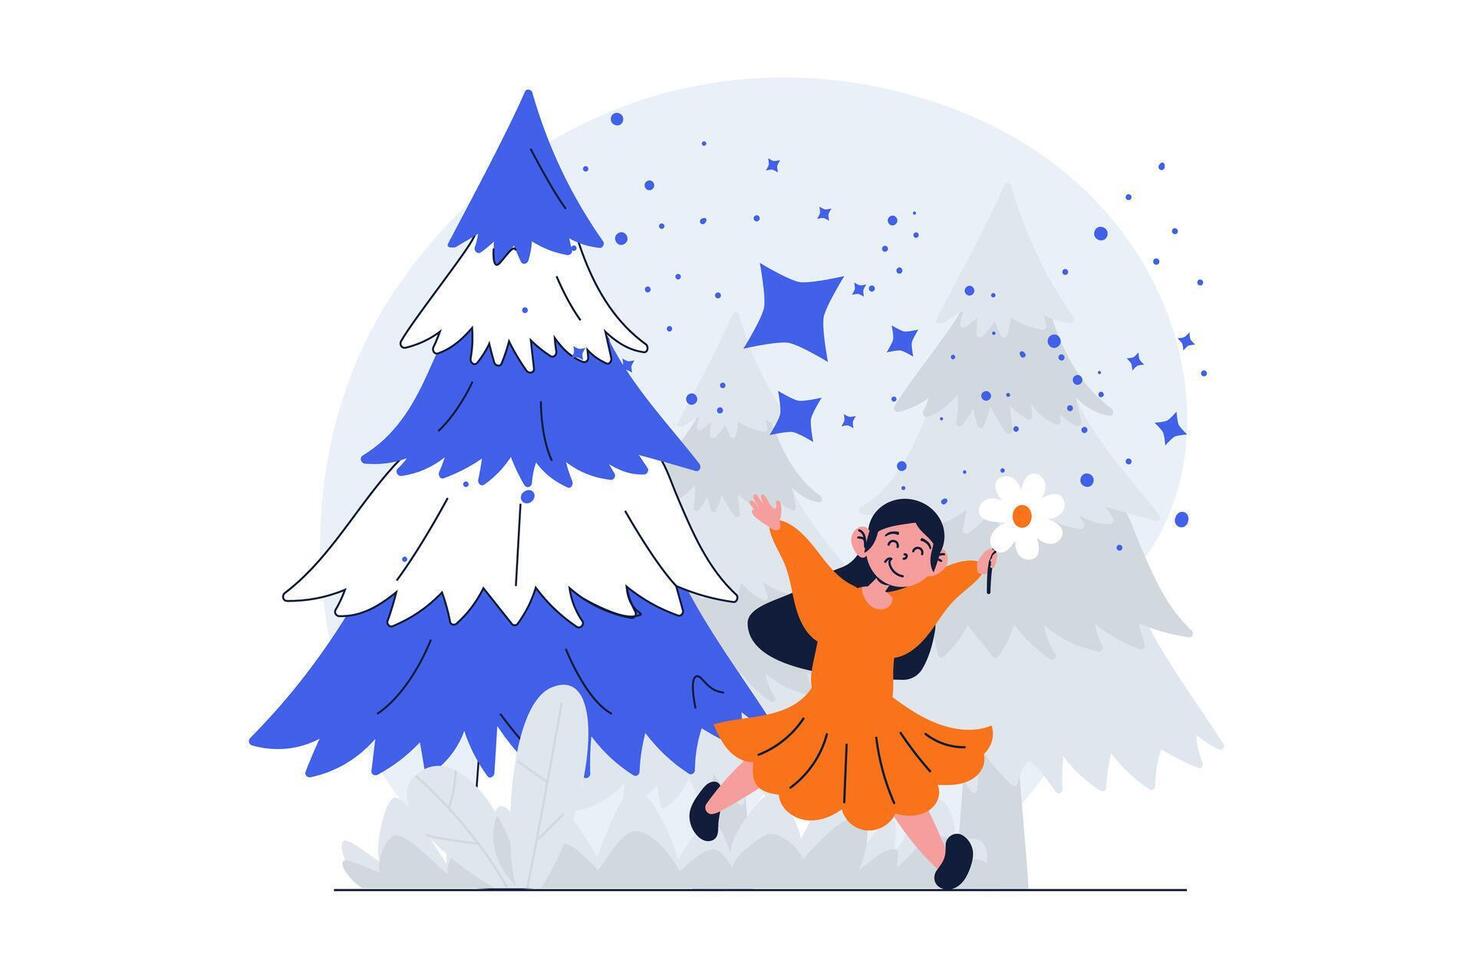 Children playing web concept with character scene. Cute girl rejoices in flowers and runs in park among trees. People situation in flat design. Vector illustration for social media marketing material.